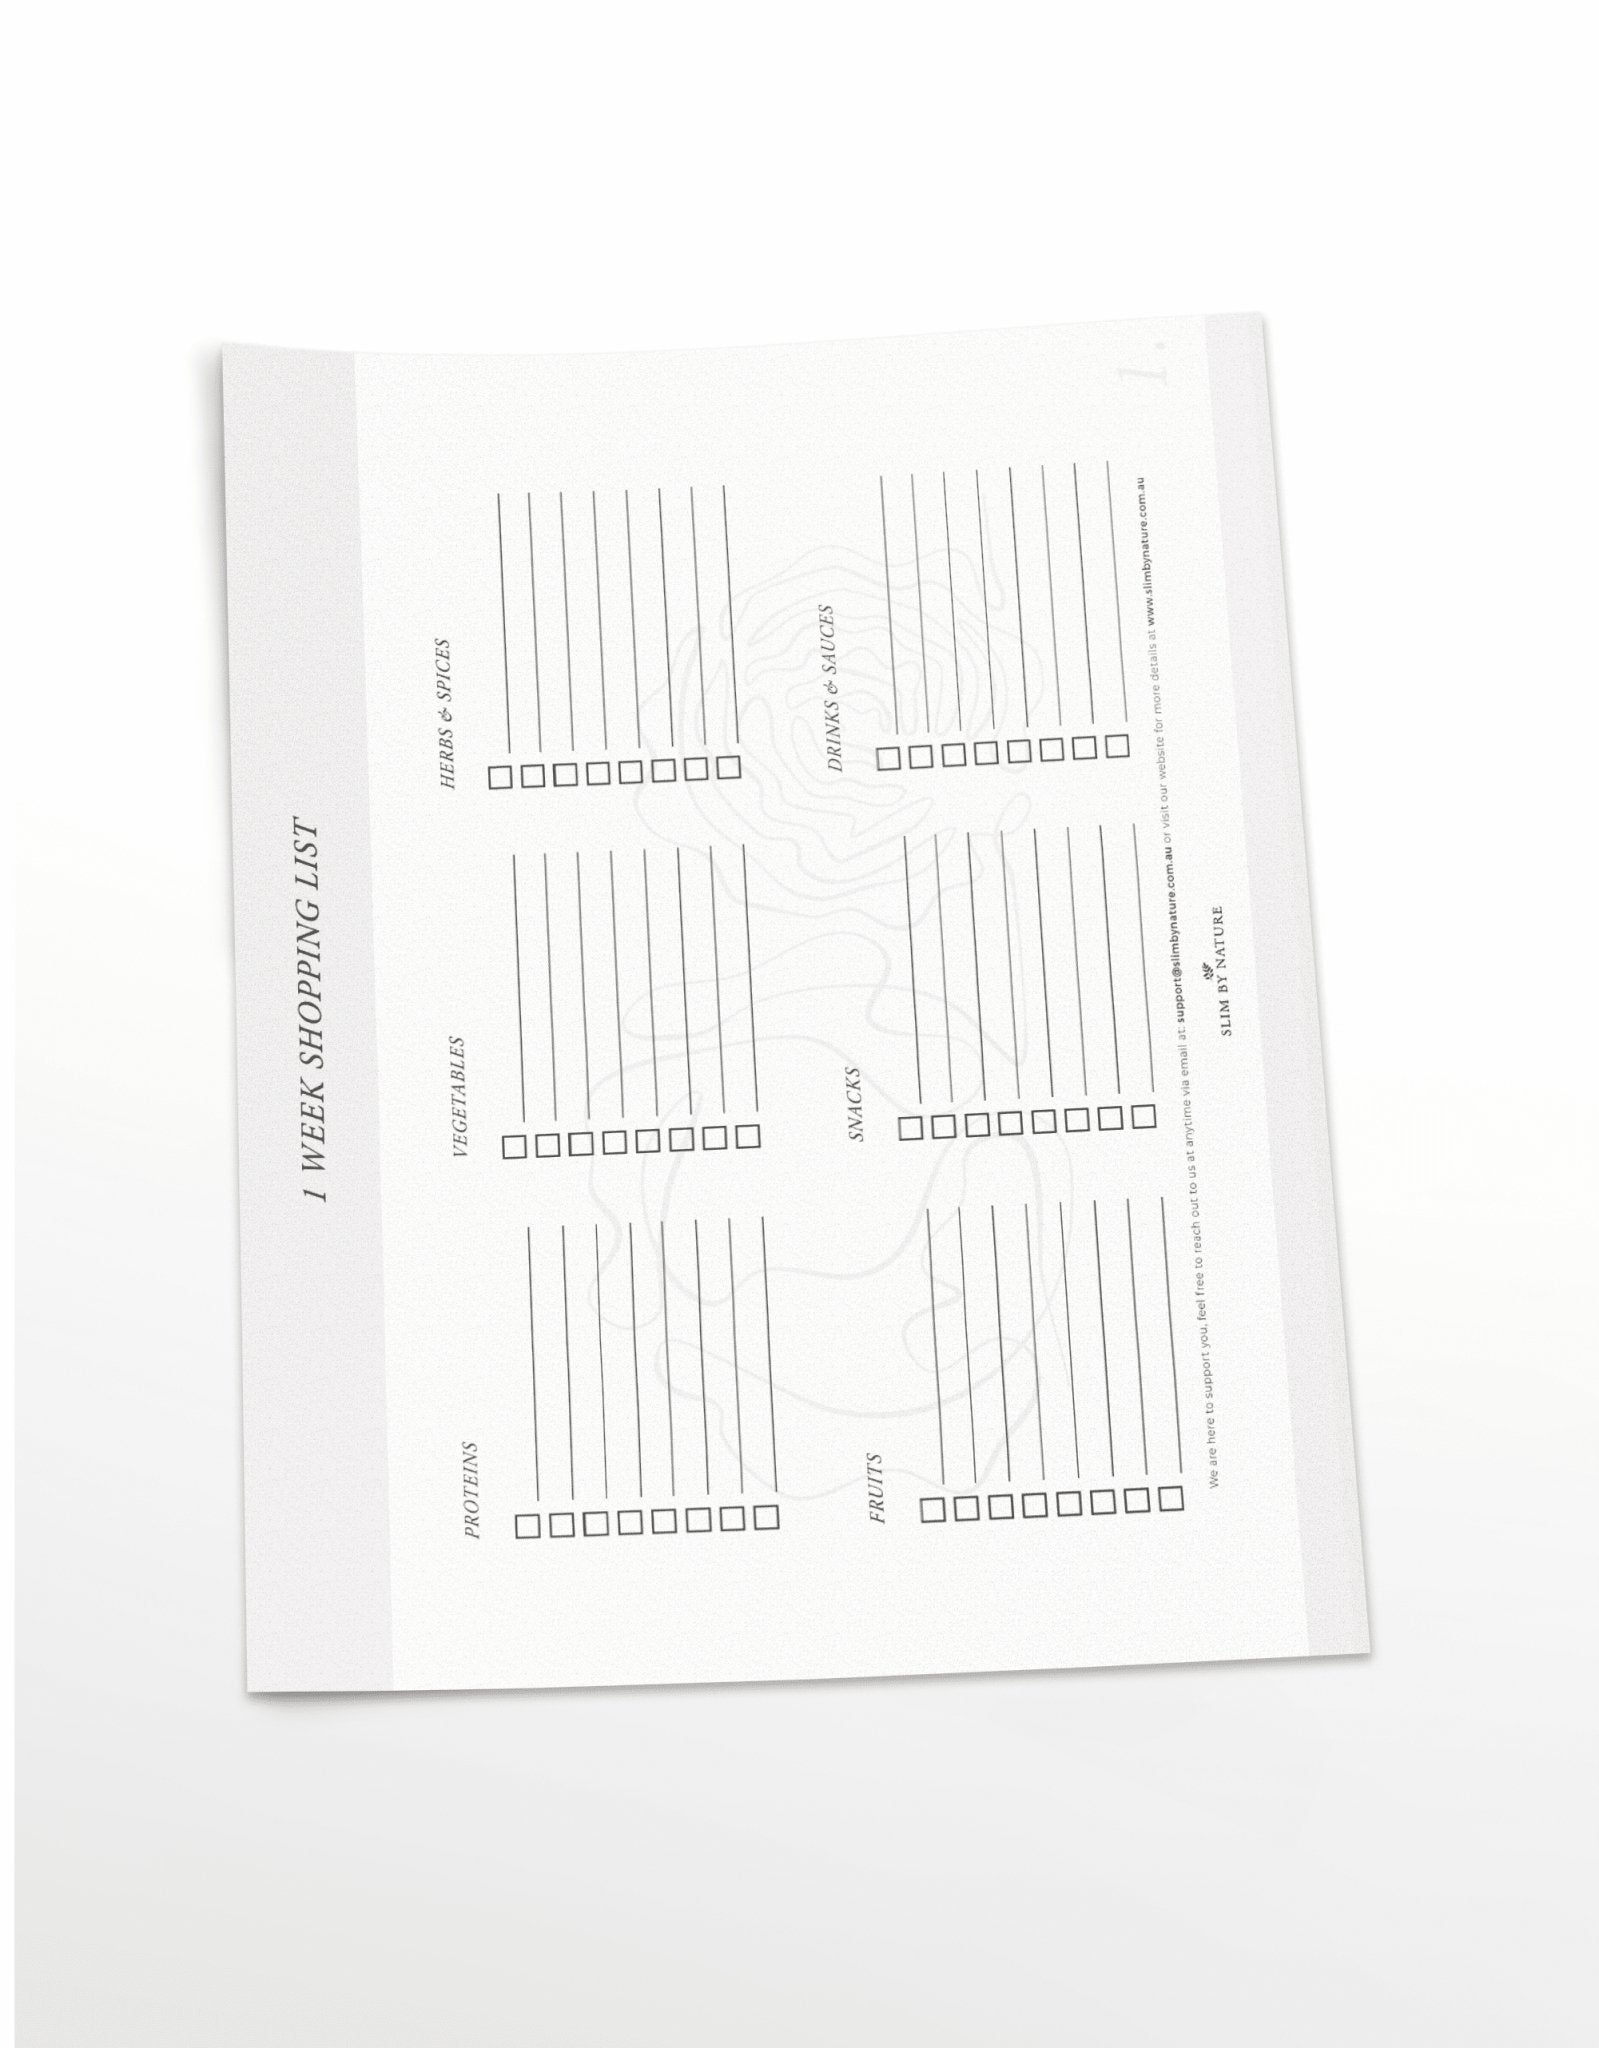 Shopping List Printable - My Store